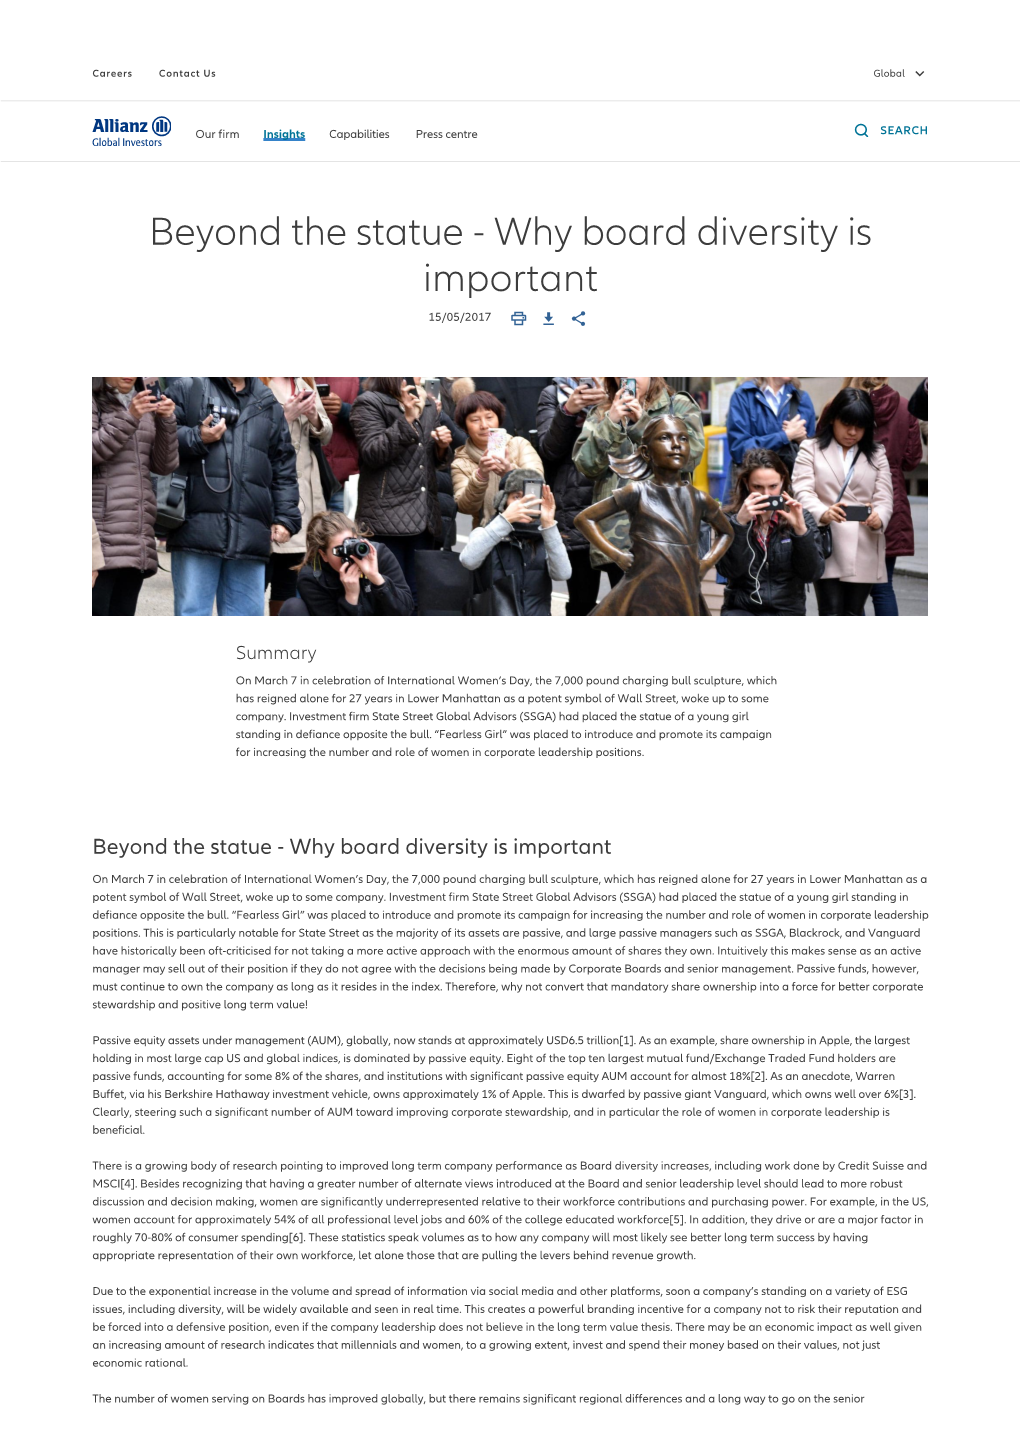 Beyond the Statue - Why Board Diversity Is Important 15/05/2017   